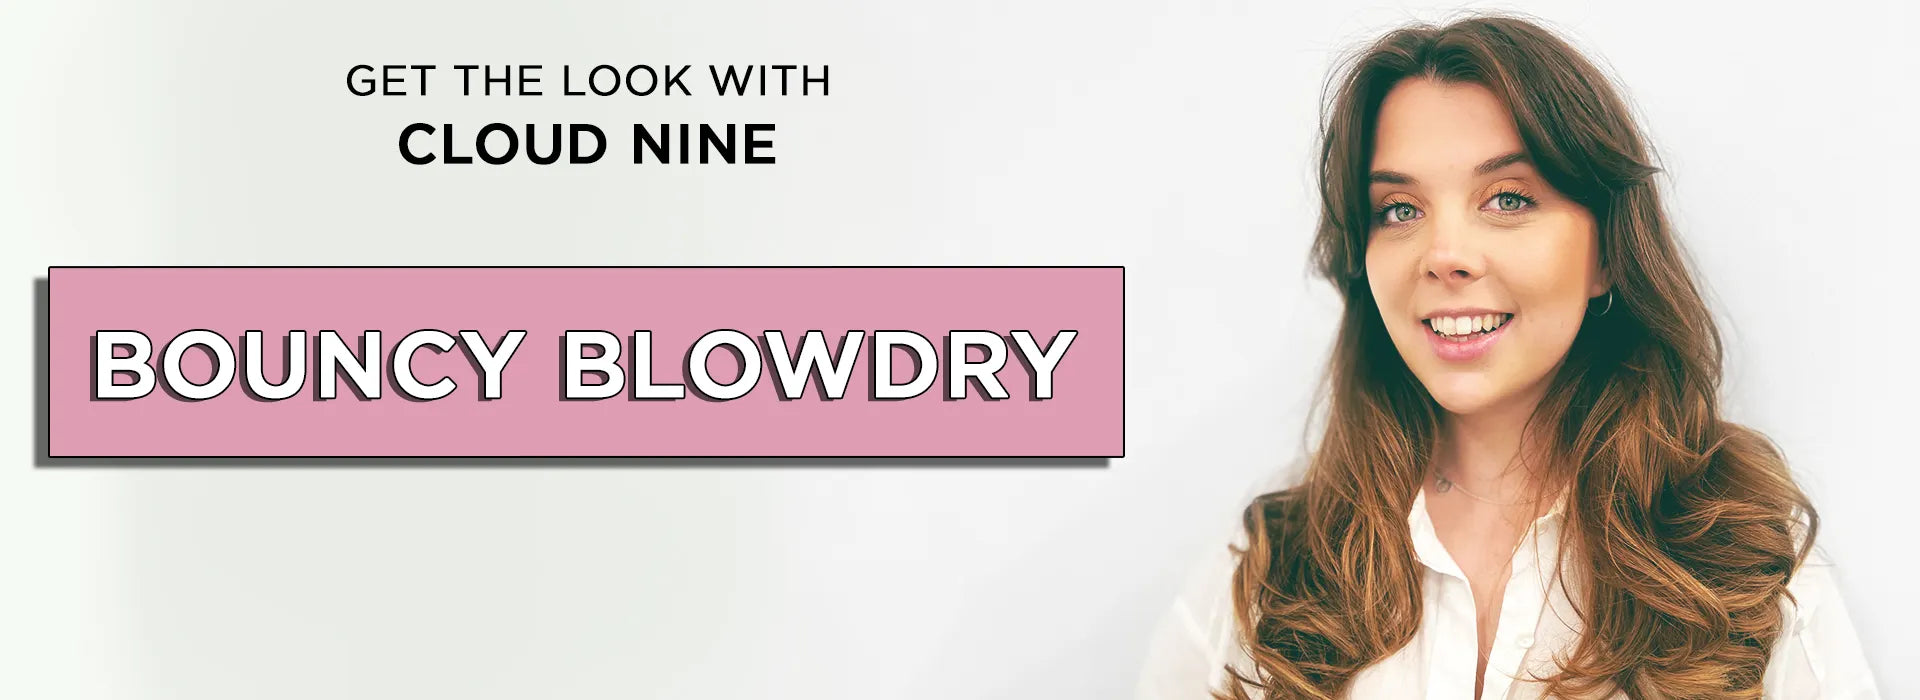 A model on the right of the screen with brown hair and a bouncy blowdry. The text reads 'Get the look with CLOUD NINE - Bouncy Blowdry'.